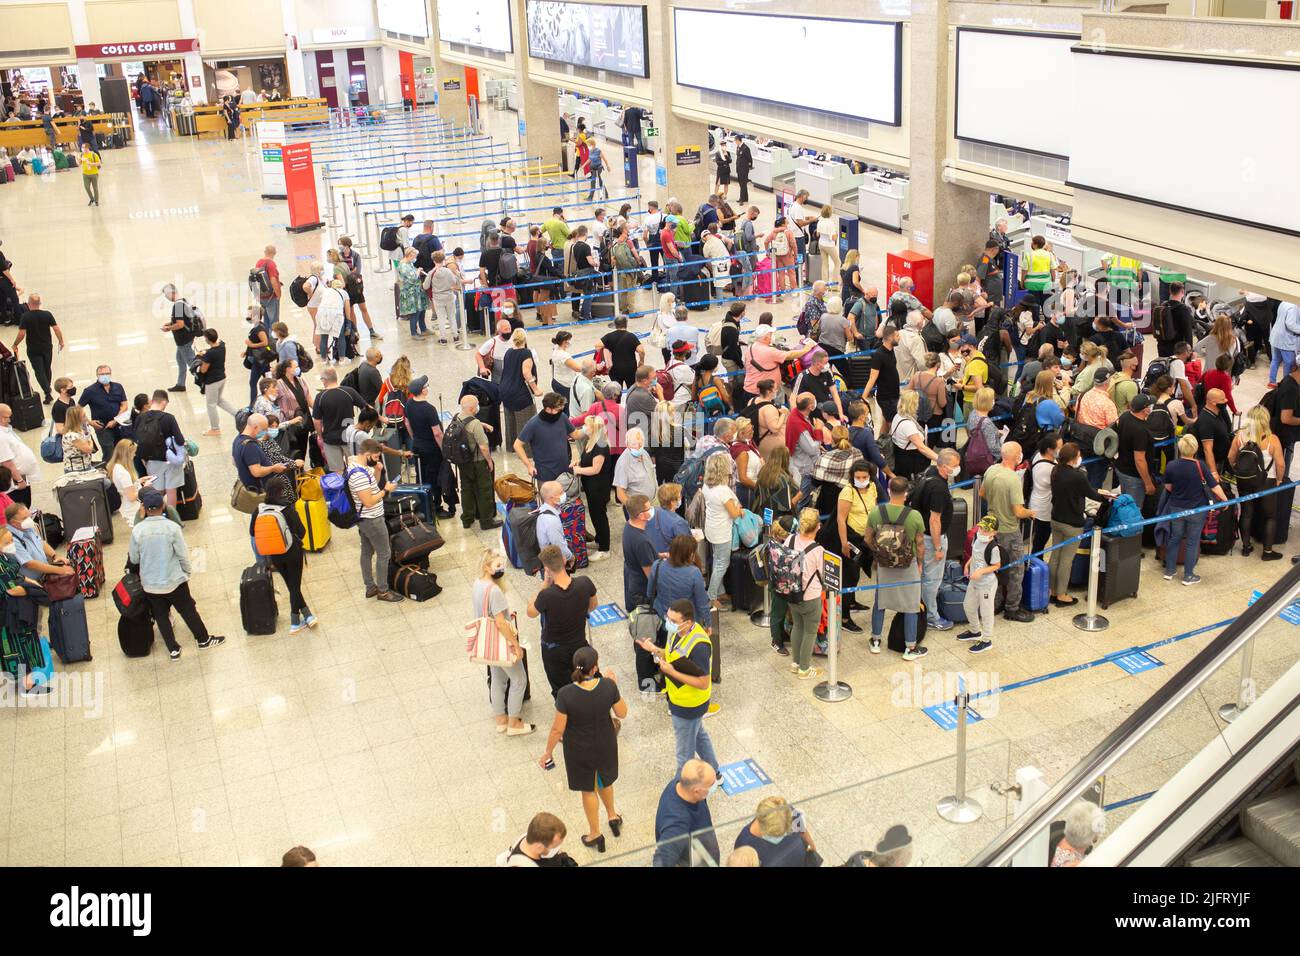 Luqa, Malta - October 22, 2021: People lining up to check-in counters at the Luqa airport in Malta. Stock Photo